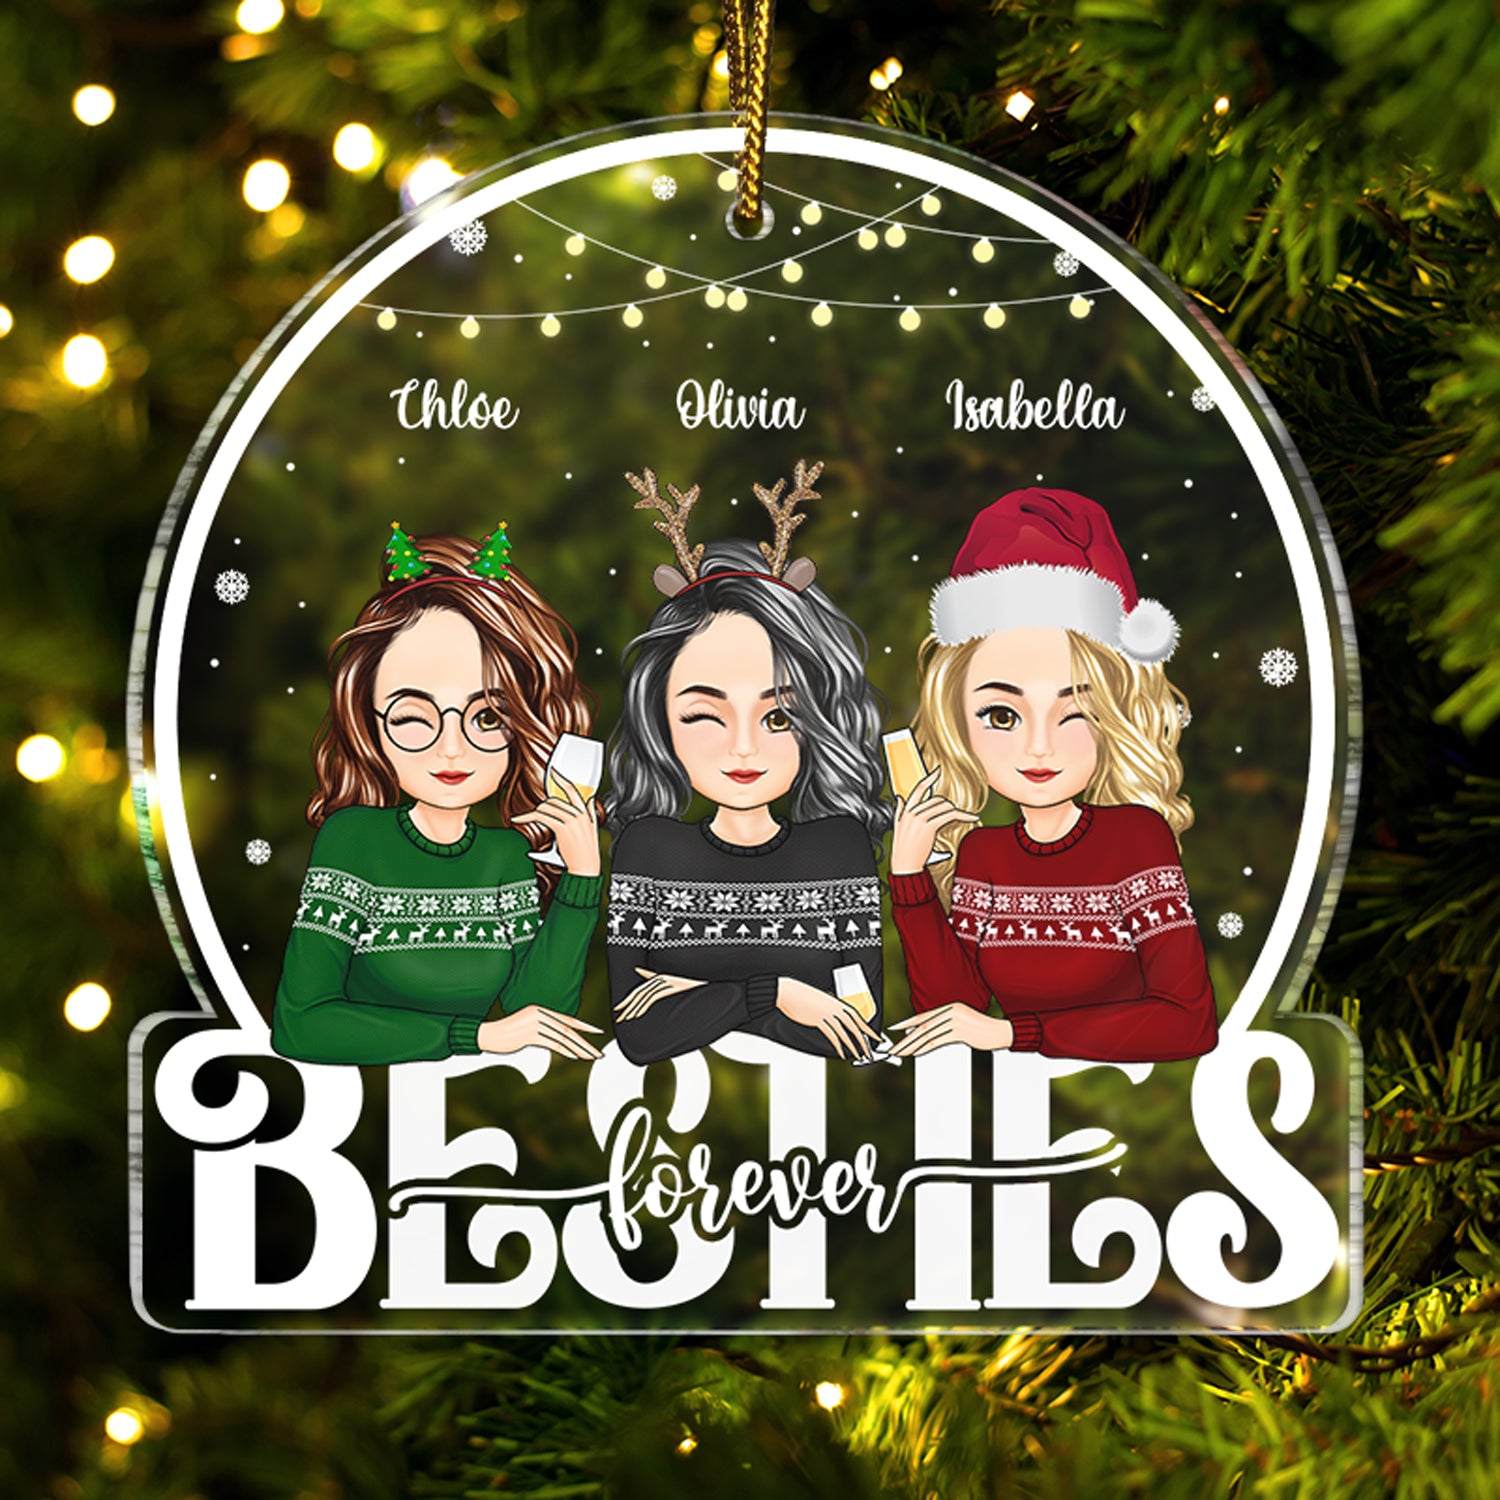 Besties Forever - Christmas, Bestie BFF Gift - Personalized Custom Shaped Acrylic Ornament